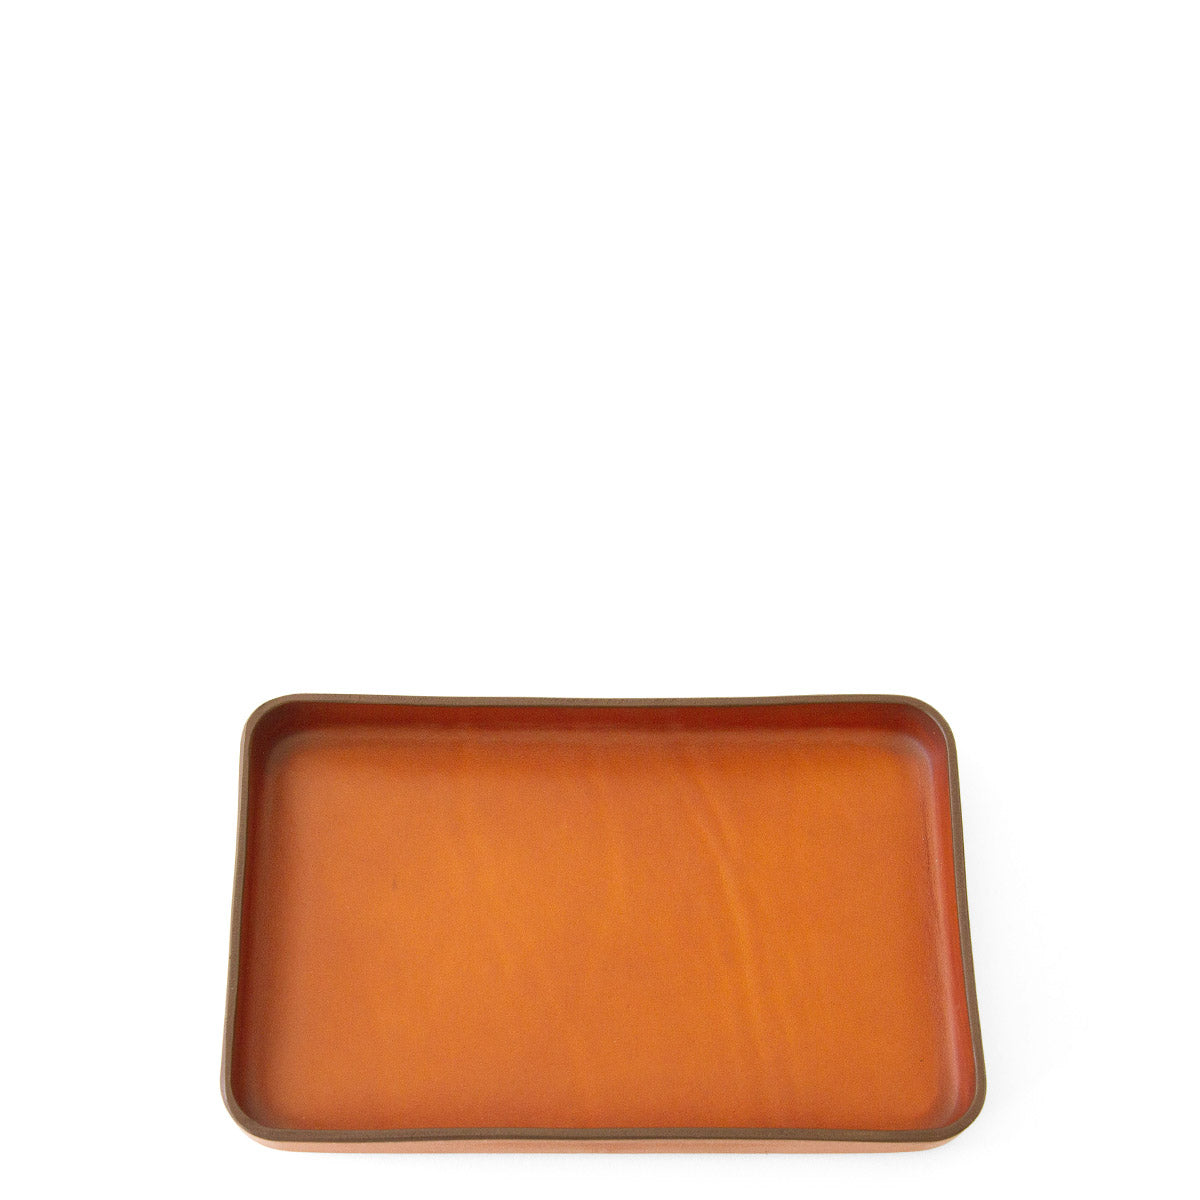 Swags Large Valet Tray - Tan